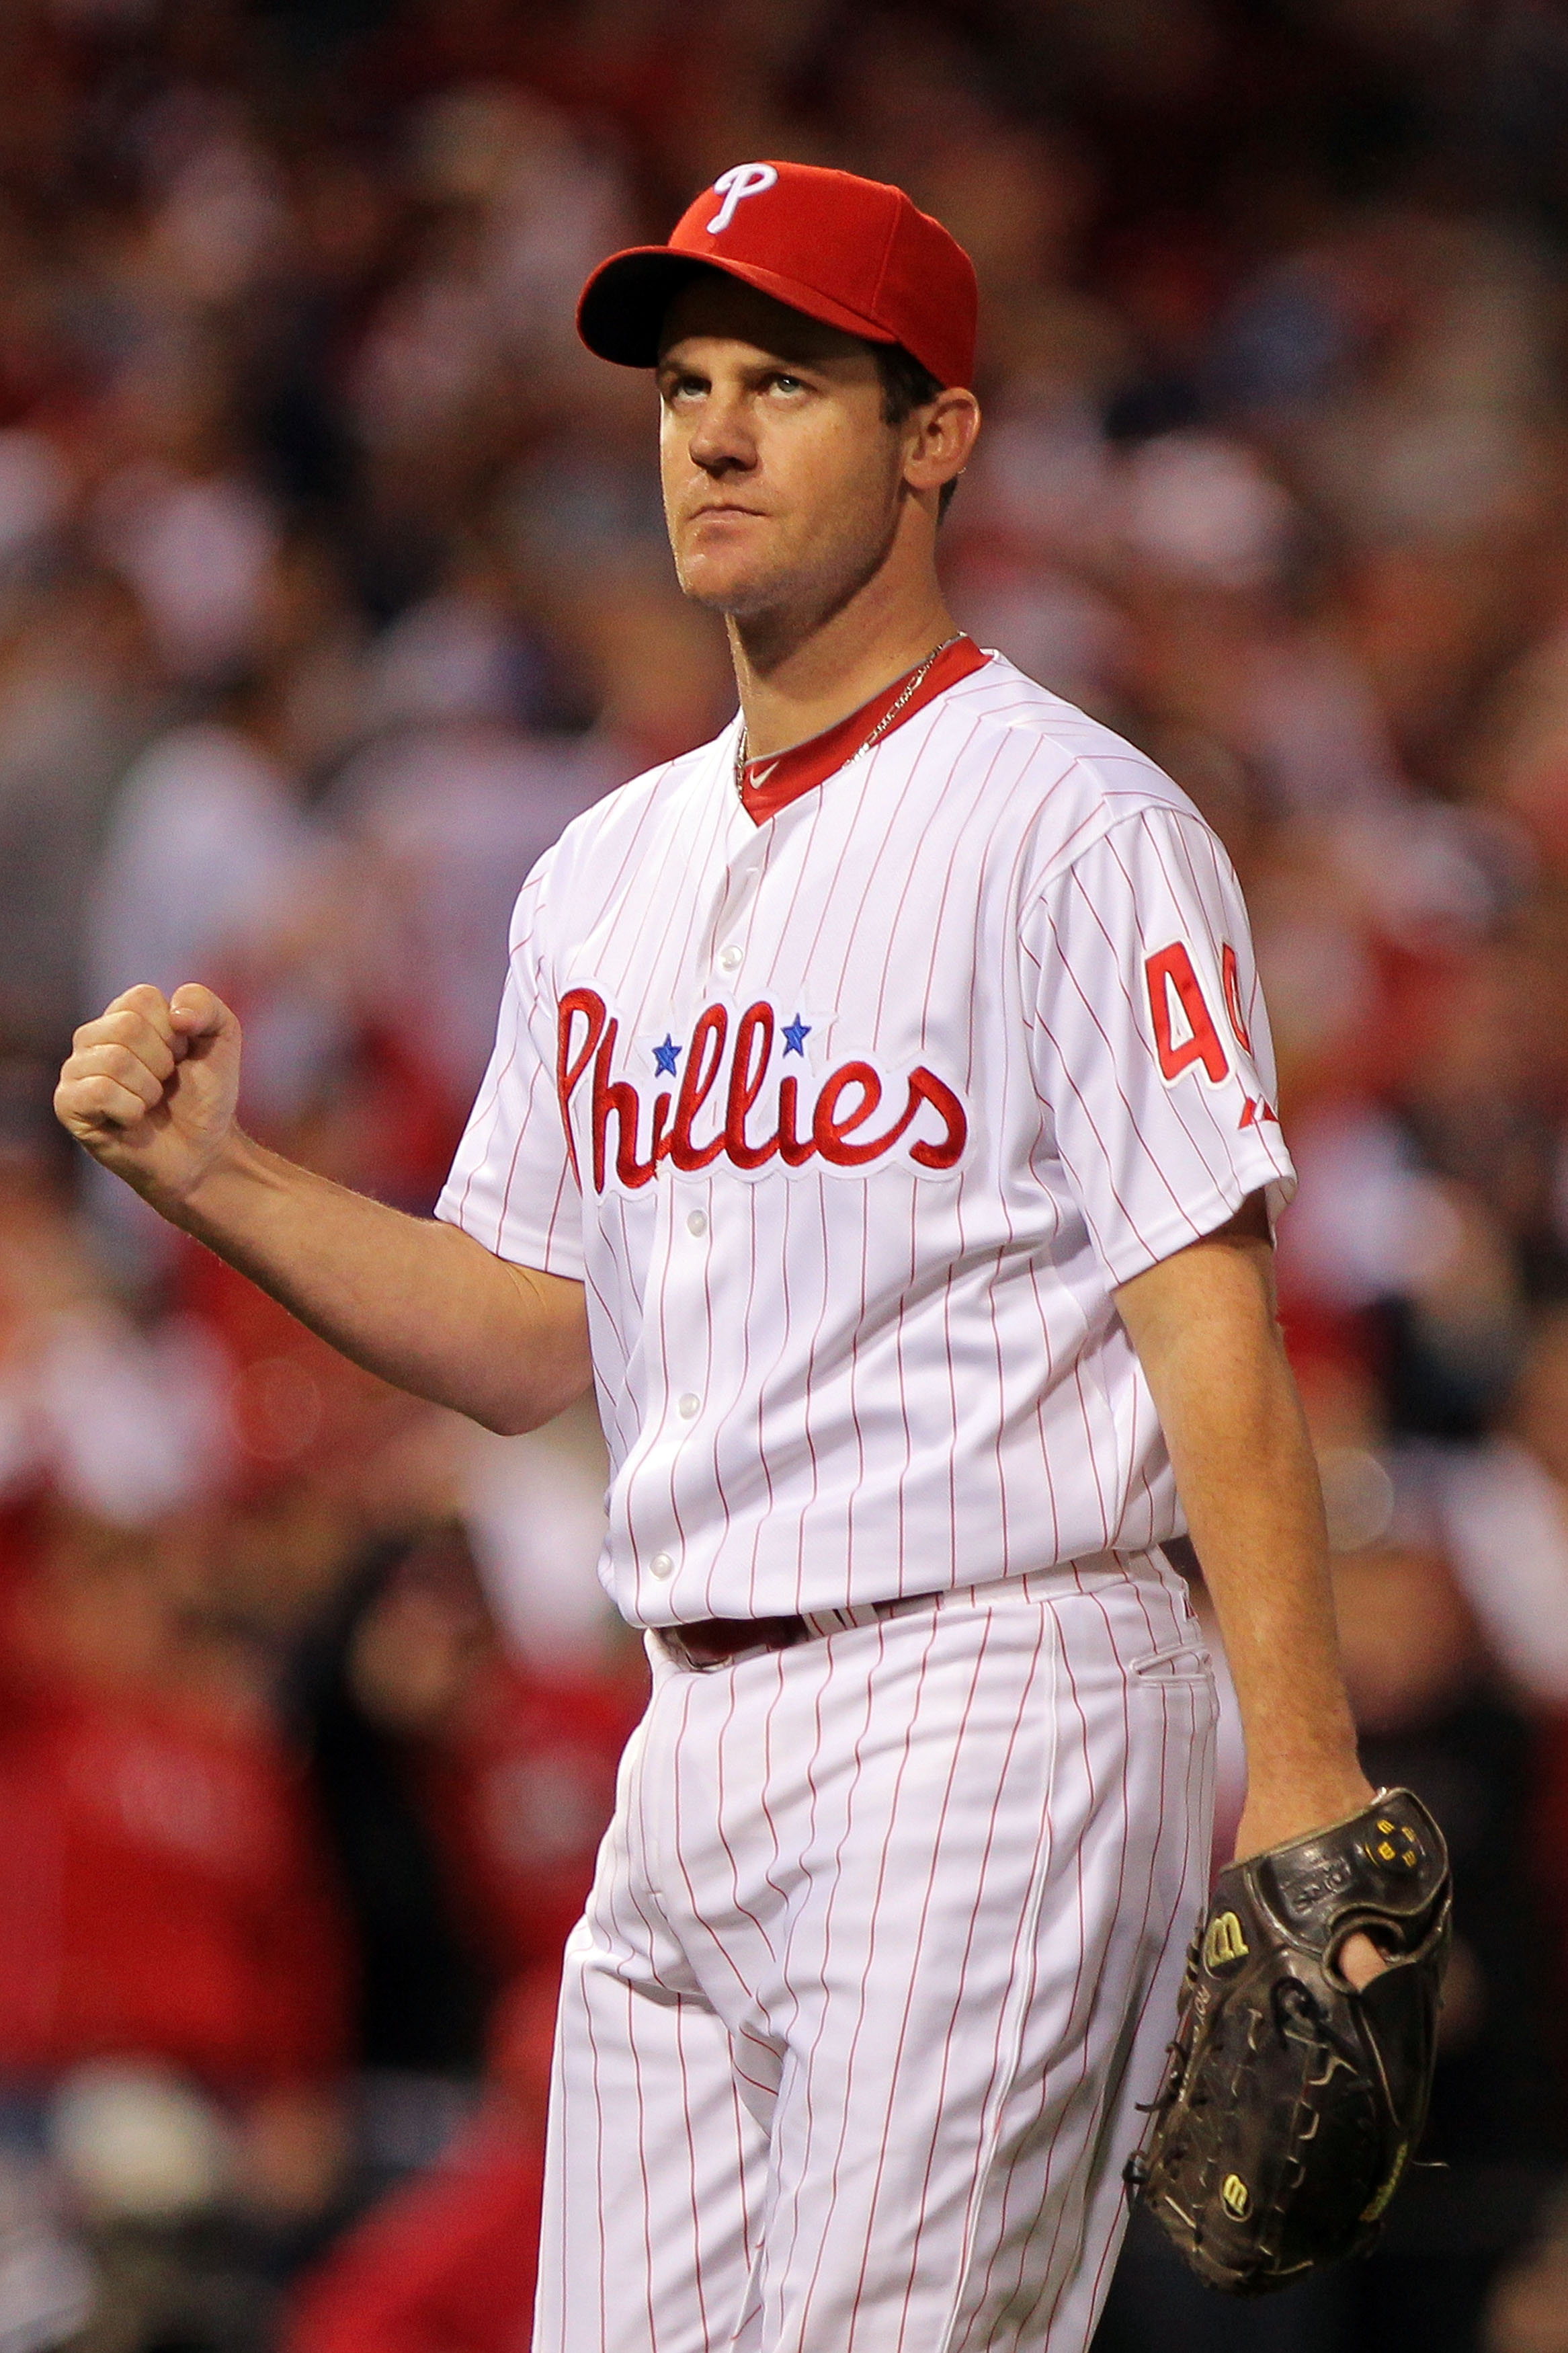 Phillies could have interest in retaining Sizemore